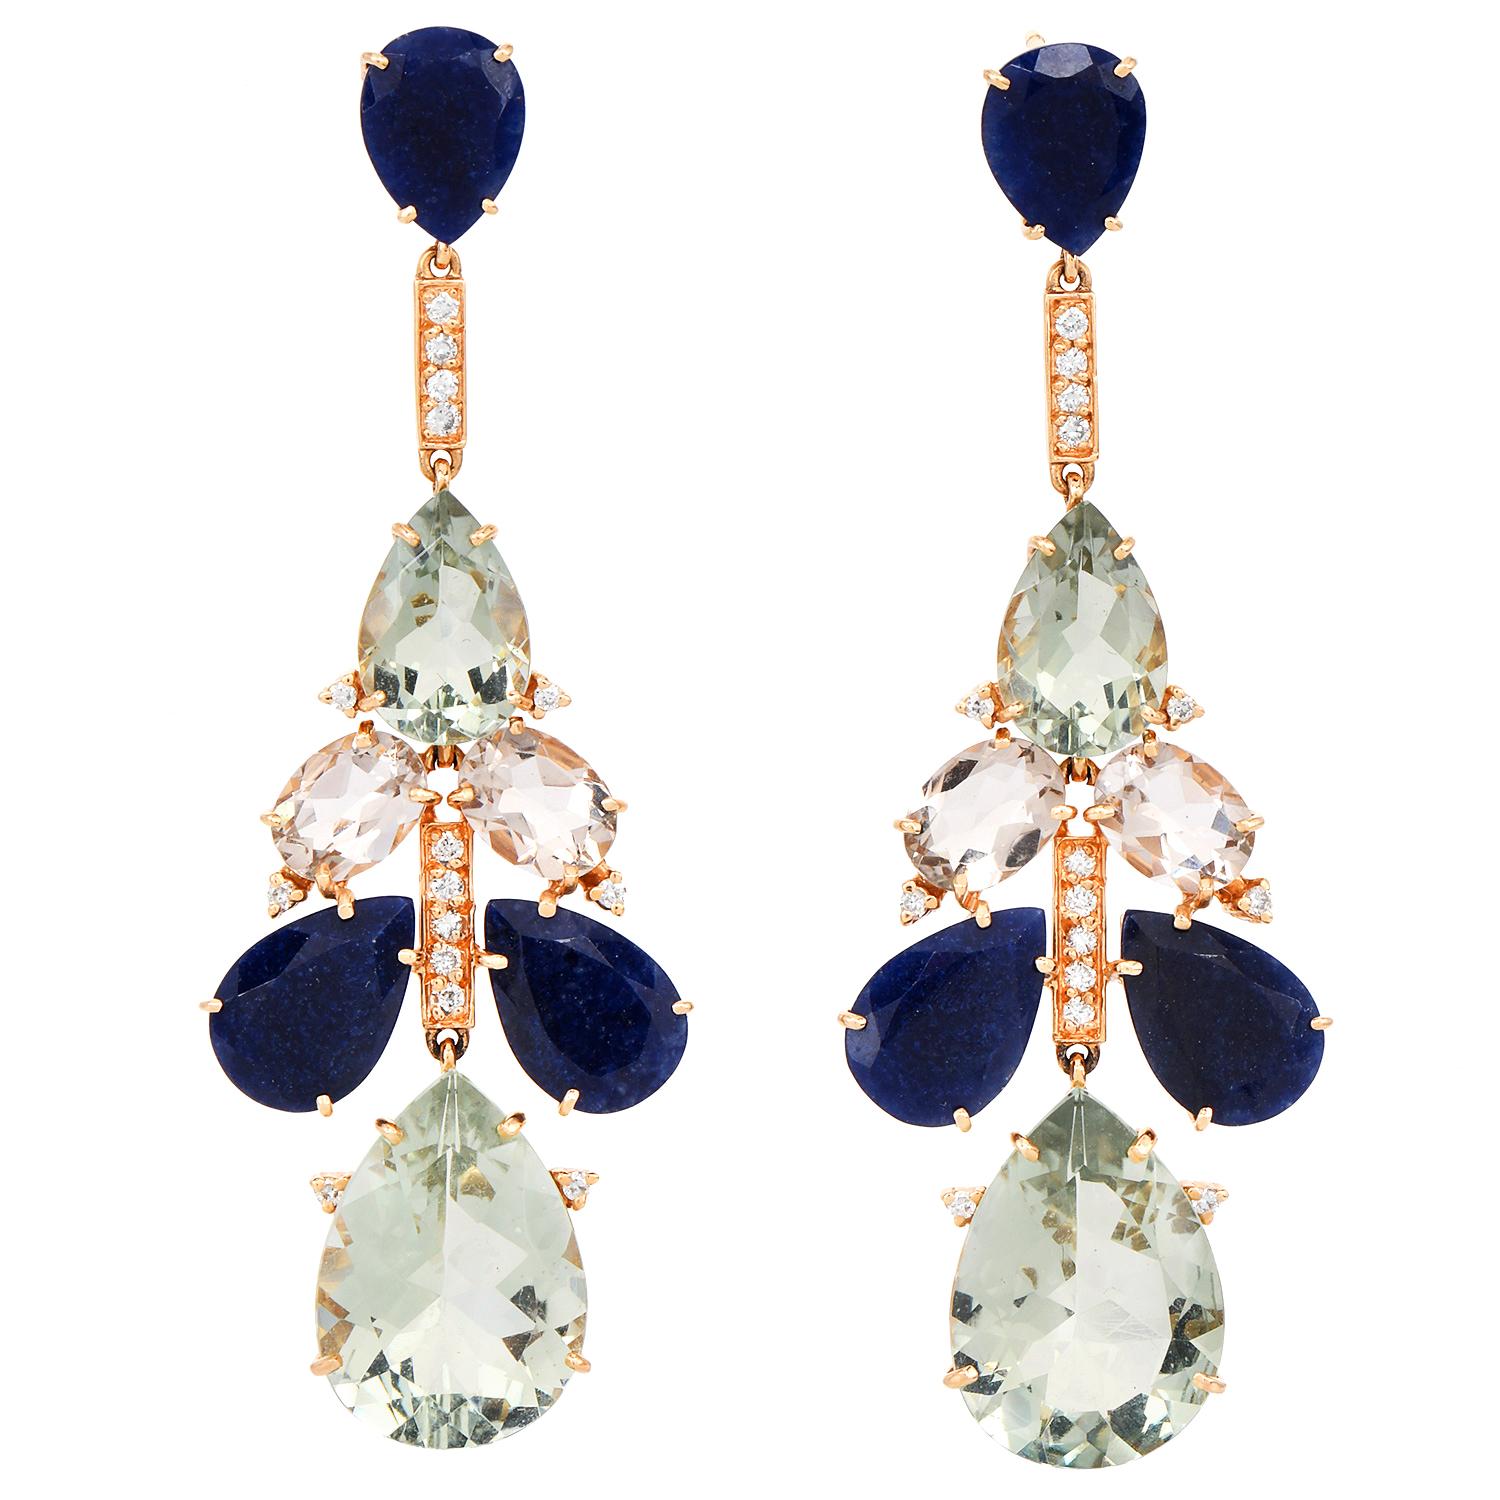 Look great with these celebrity chandelier earrings.

These long earrings are Crafted in solid 18K yellow gold, flower motif multi-dangle drop earrings. Set with 6 pear-shaped Blue sapphires weighing approx. 15.00 carats, 4 pear-shaped green